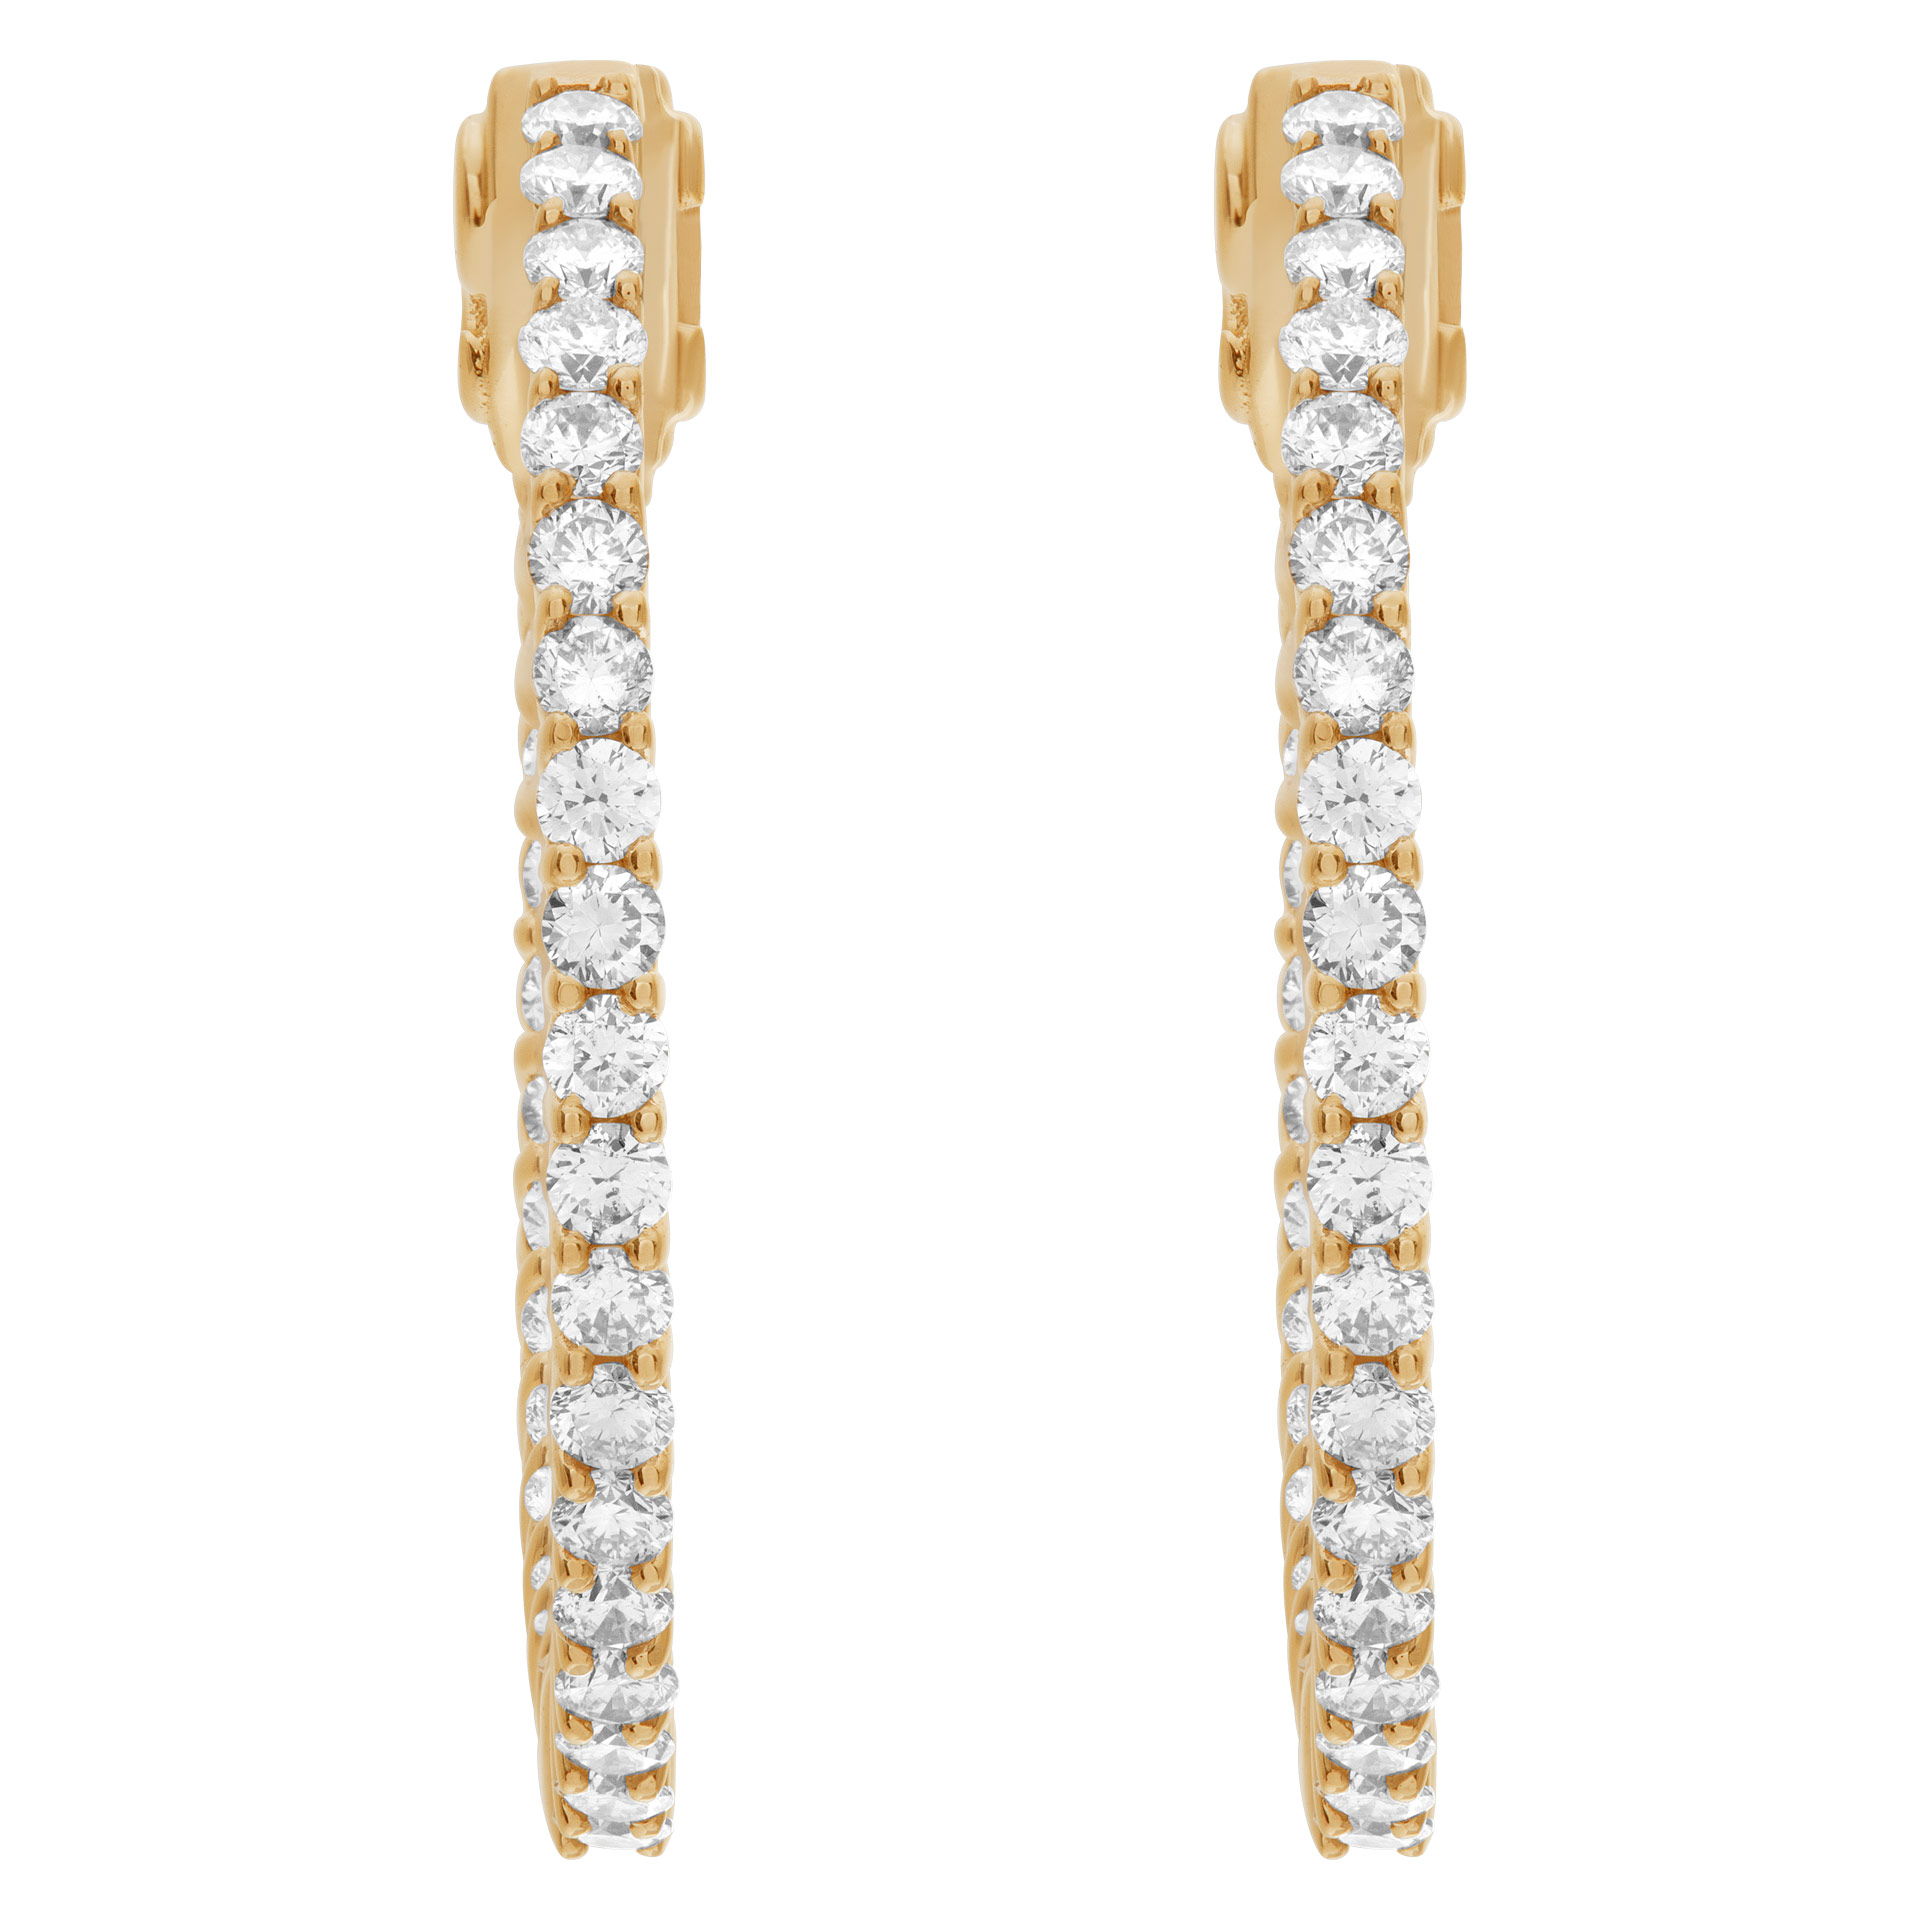 Gorgeous "Inside/out" hoop earrings with 1.66 carats in diamonds in 14k gold